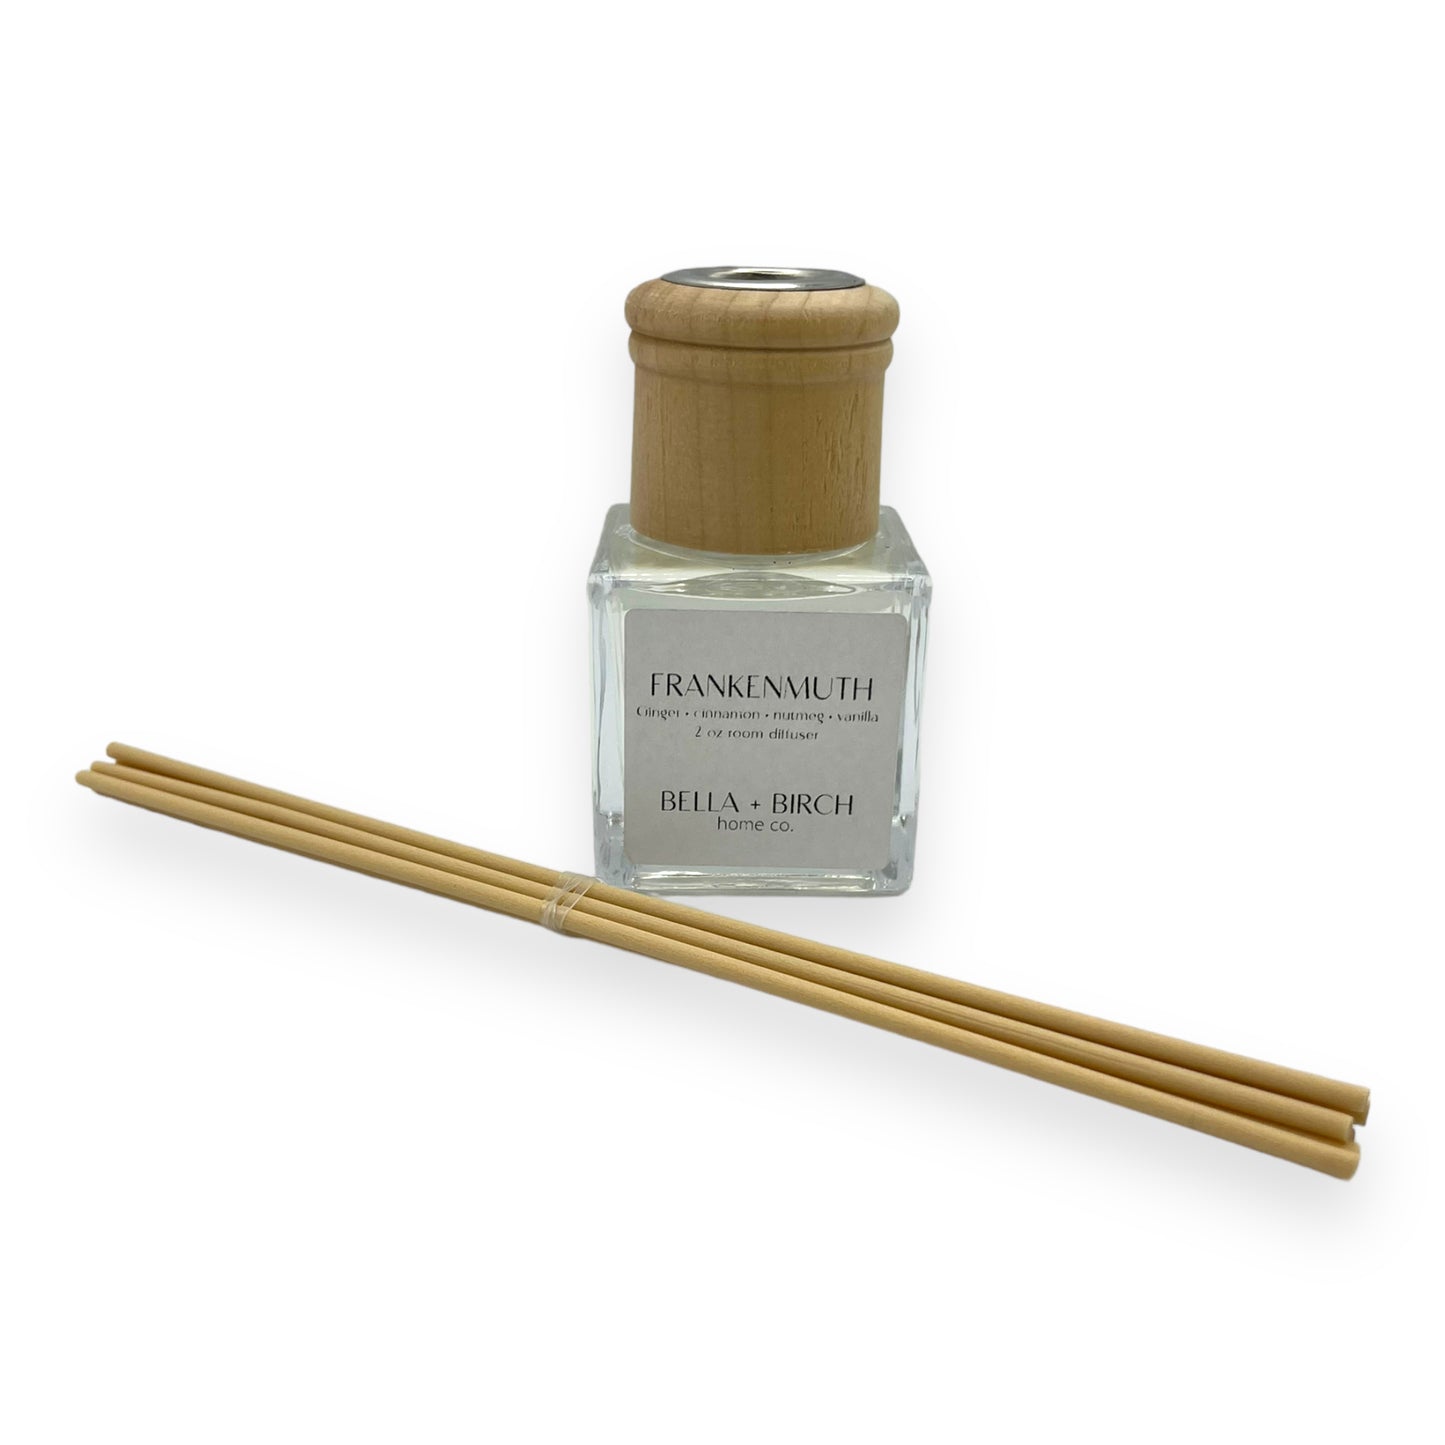 Frankenmuth Room Diffuser